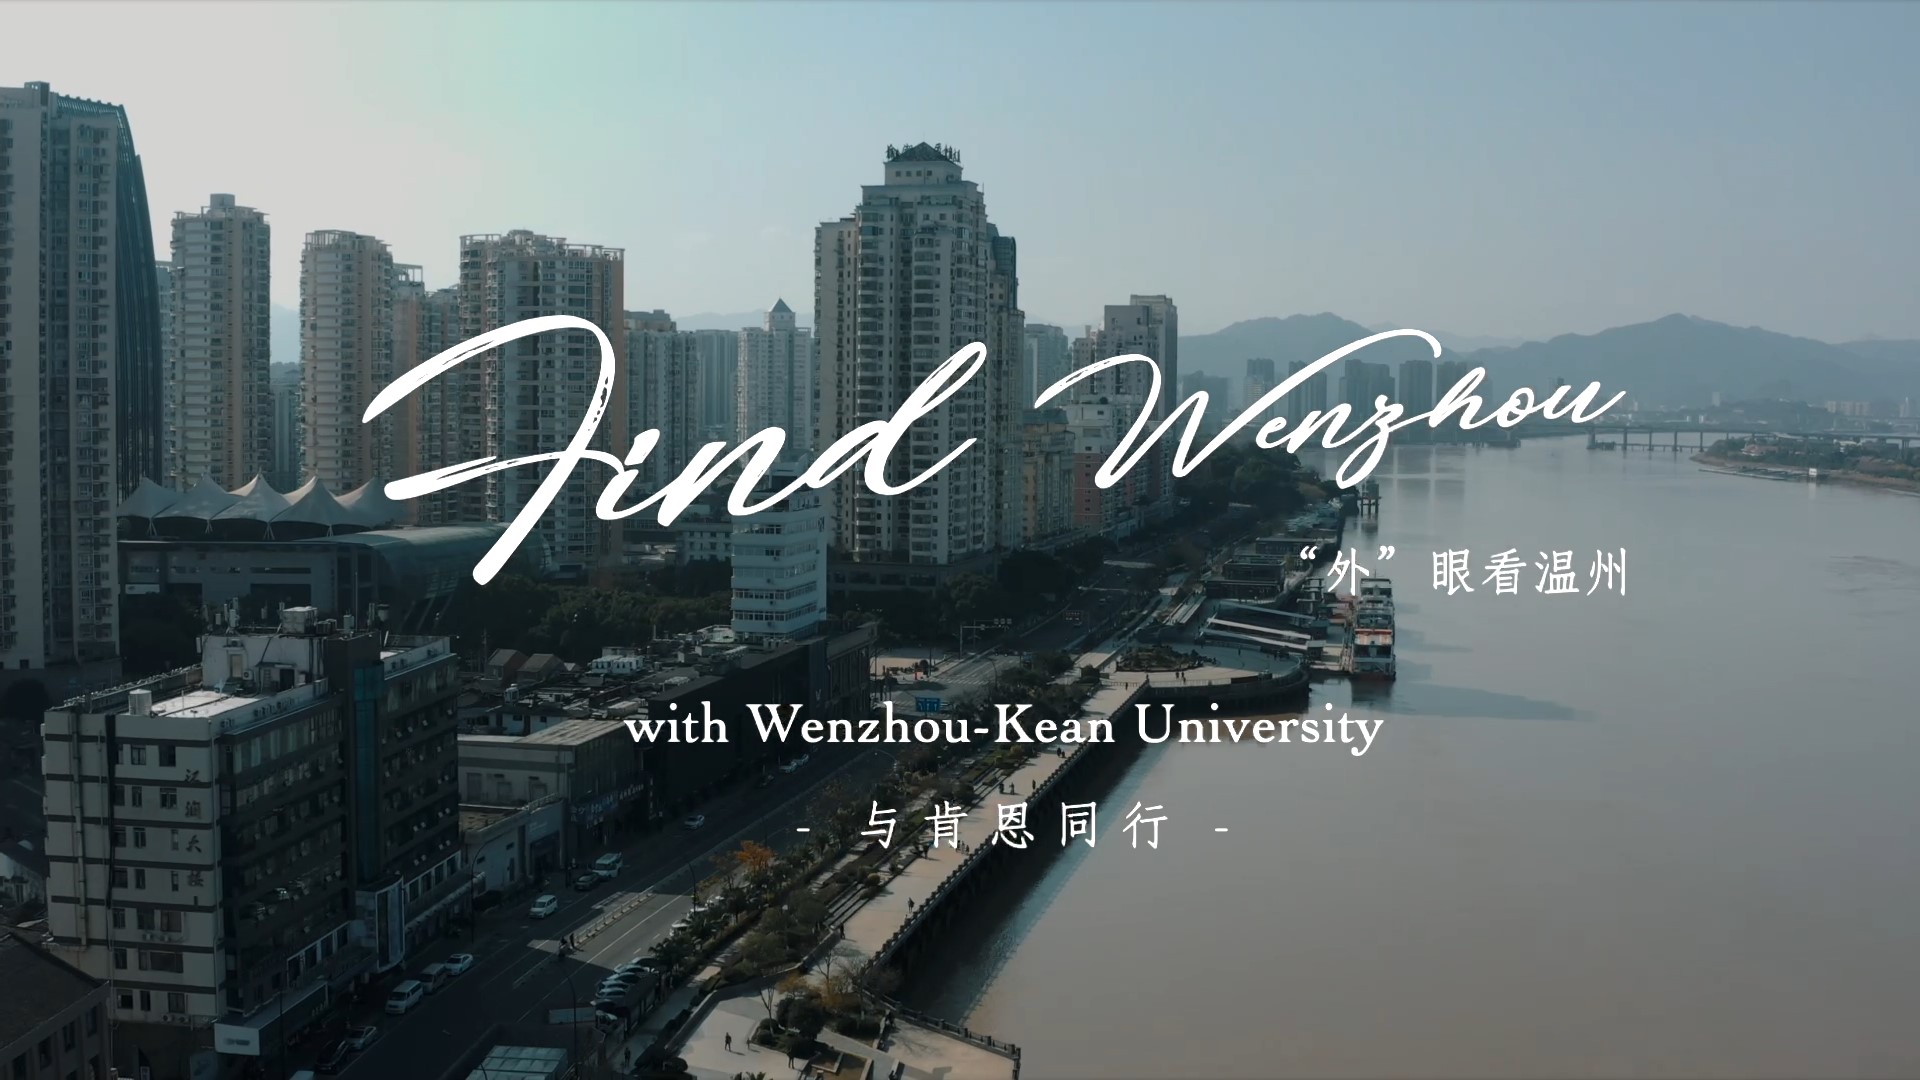 Find Wenzhou with Wenzhou-Kean University: A history of the millennium commercial port in museum artifacts